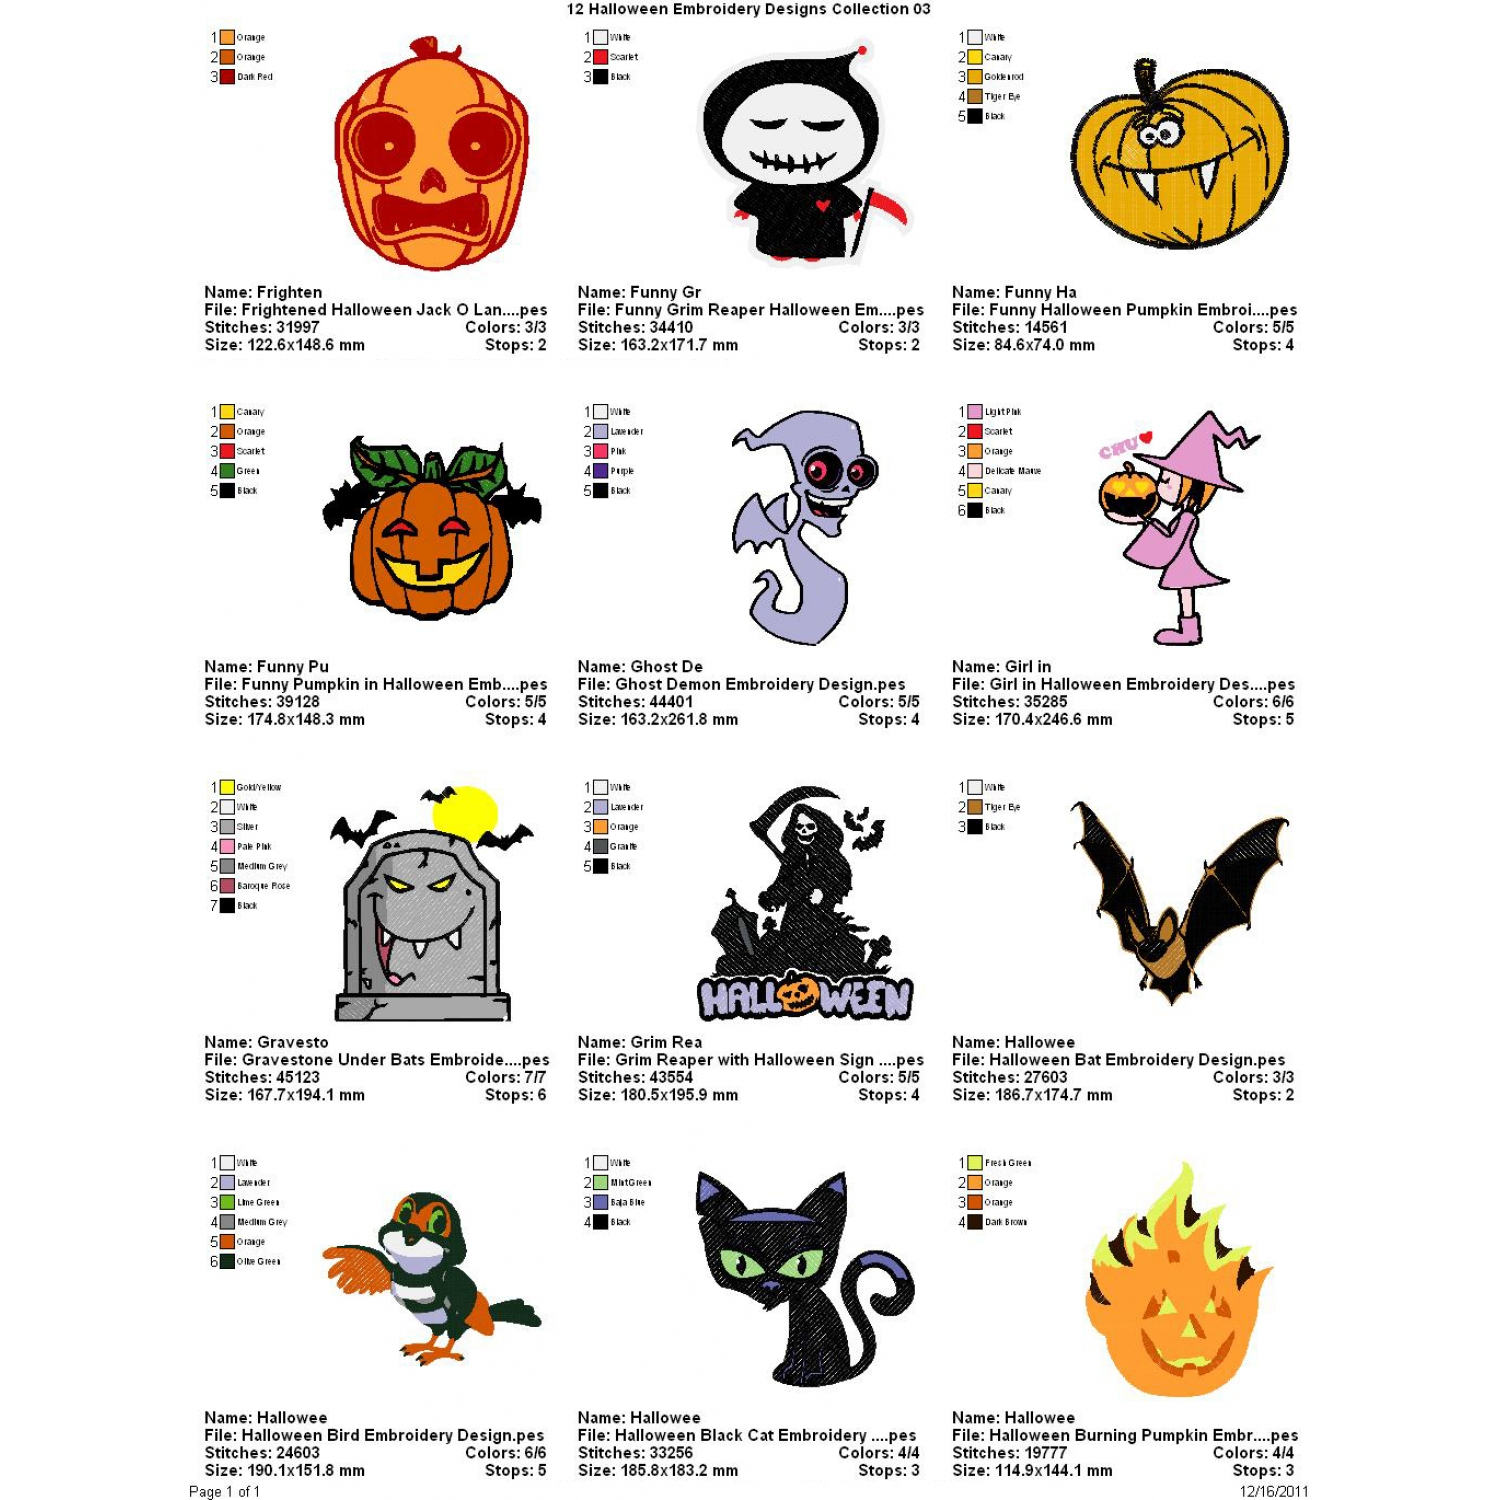 Halloween Embroidery Patterns 12 Halloween Embroidery Designs Collection 03